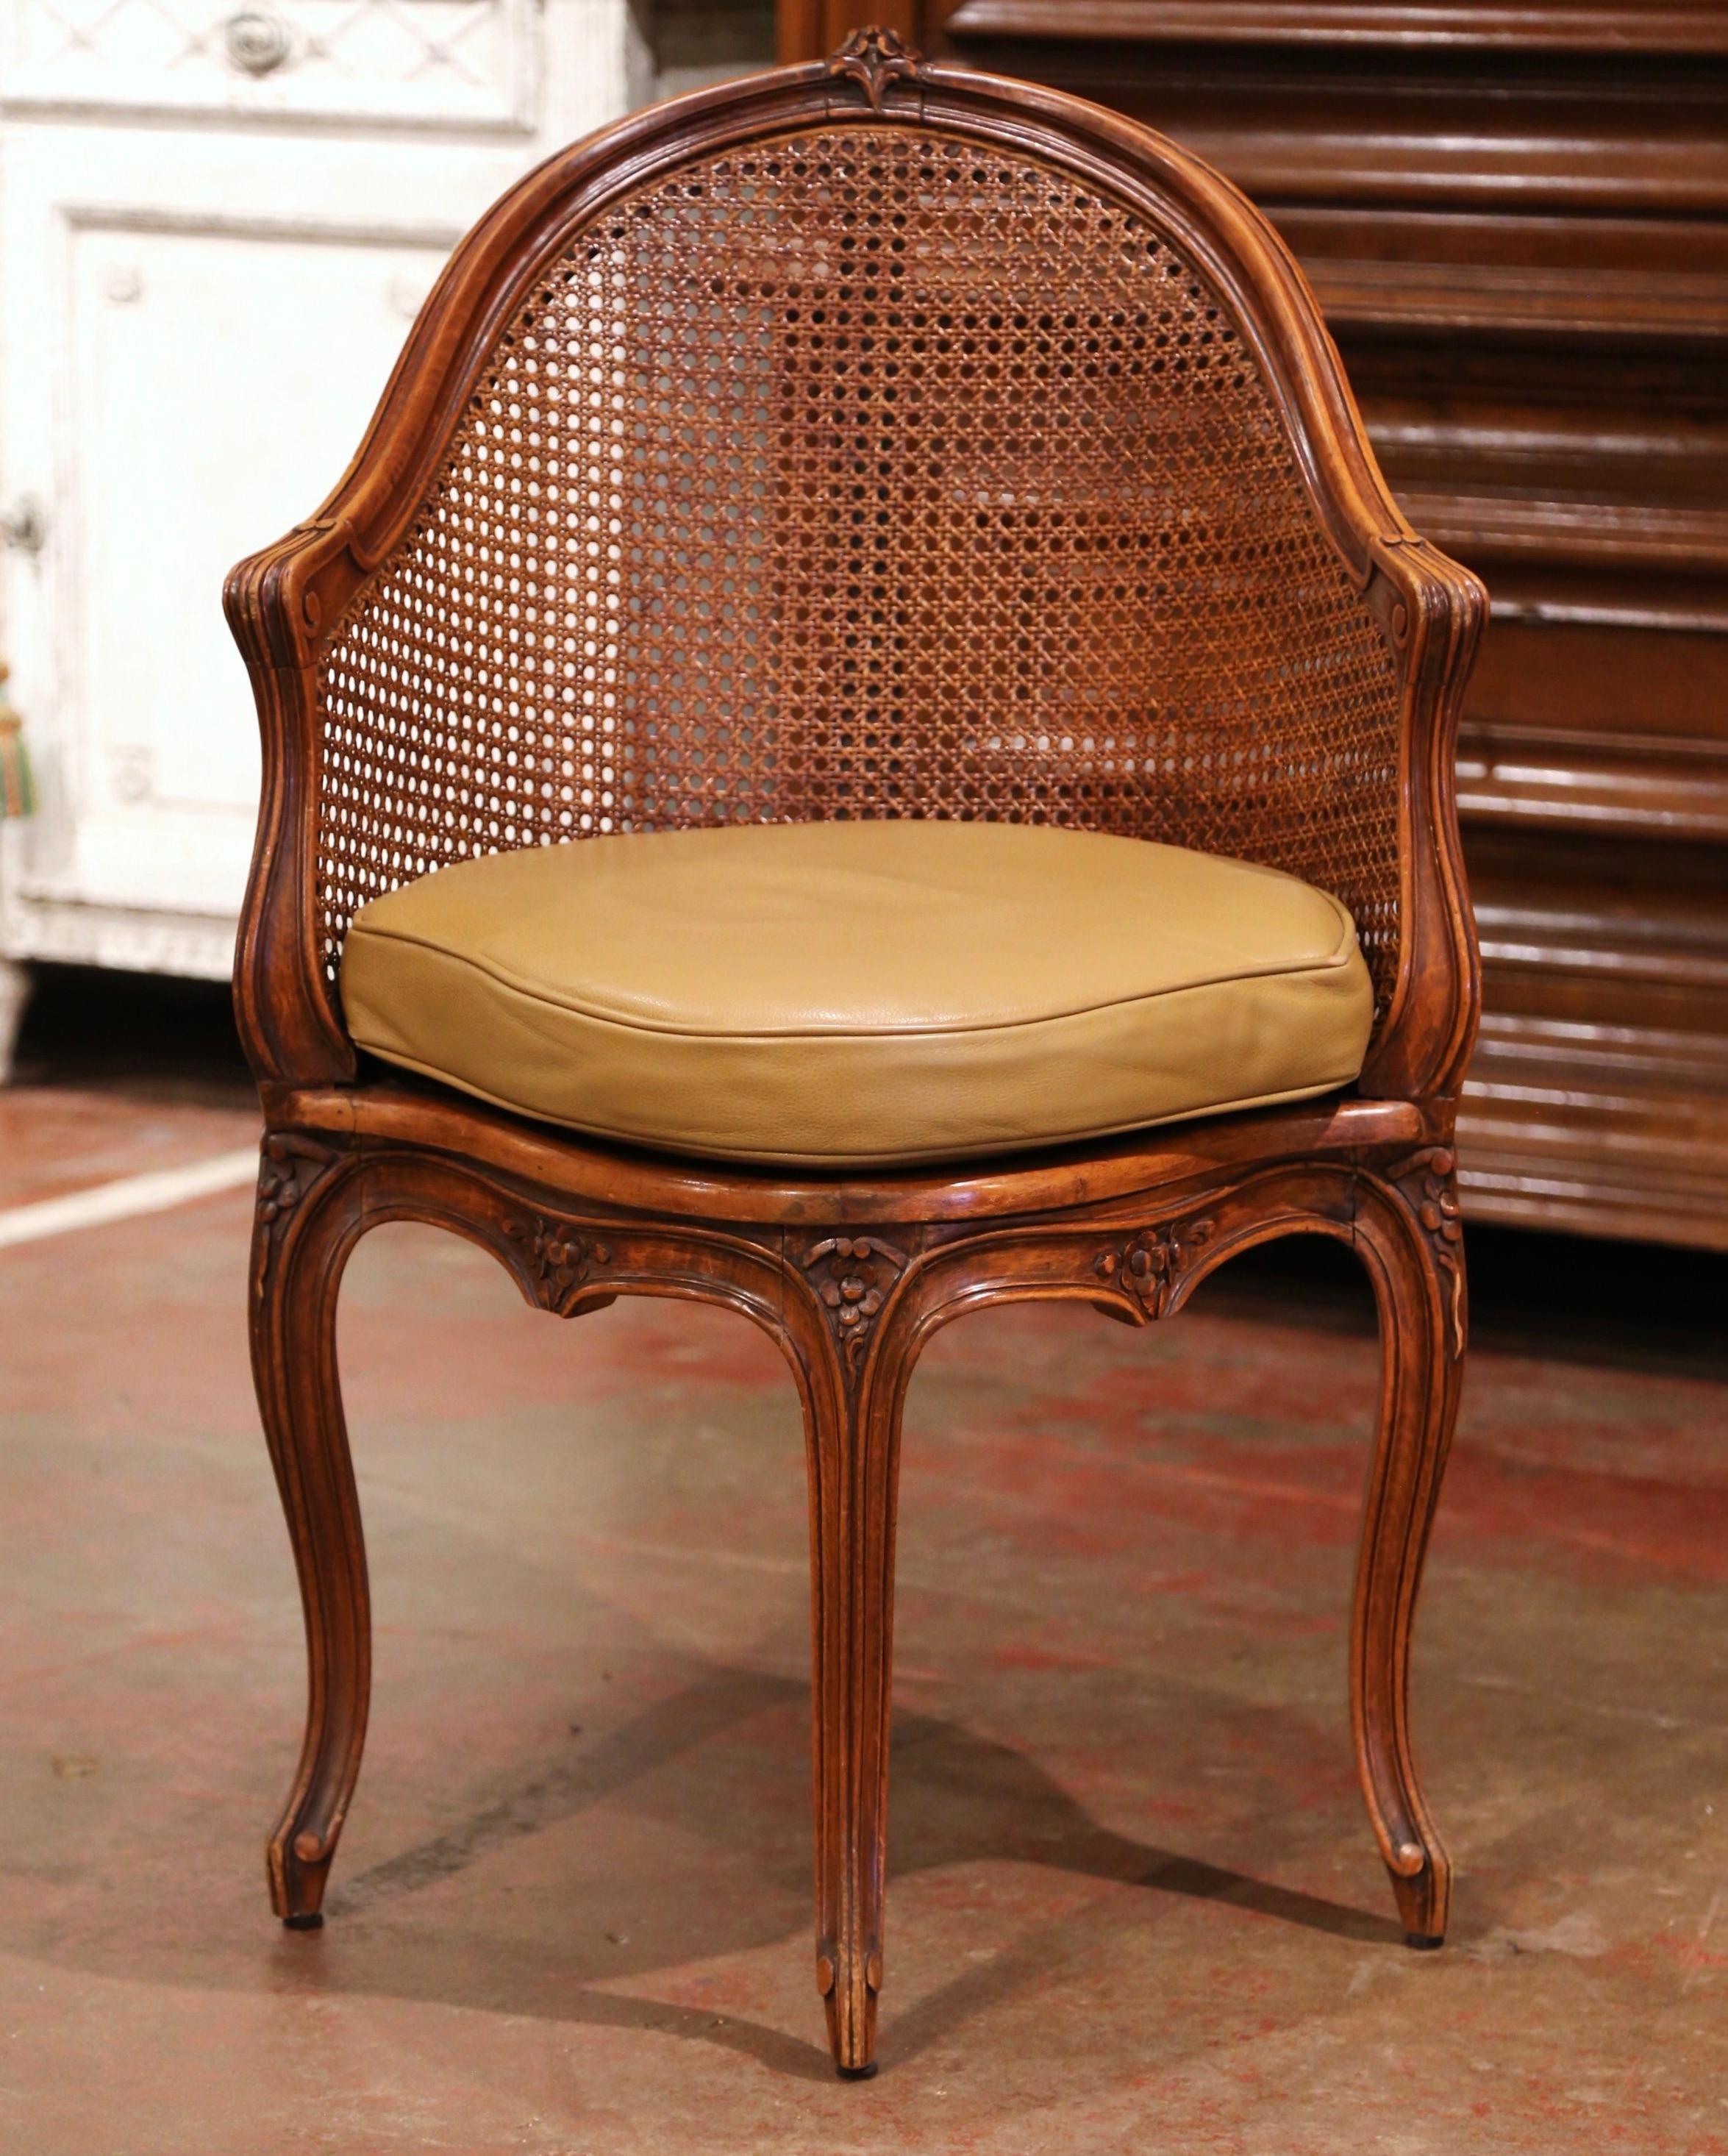 Decorate a study or office with this elegant antique desk armchair. Crafted in Provence, France, circa 1900, the corner chair has an arched cane back decorated at the top with floral motif. The traditional desk chair stands on four carved cabriole